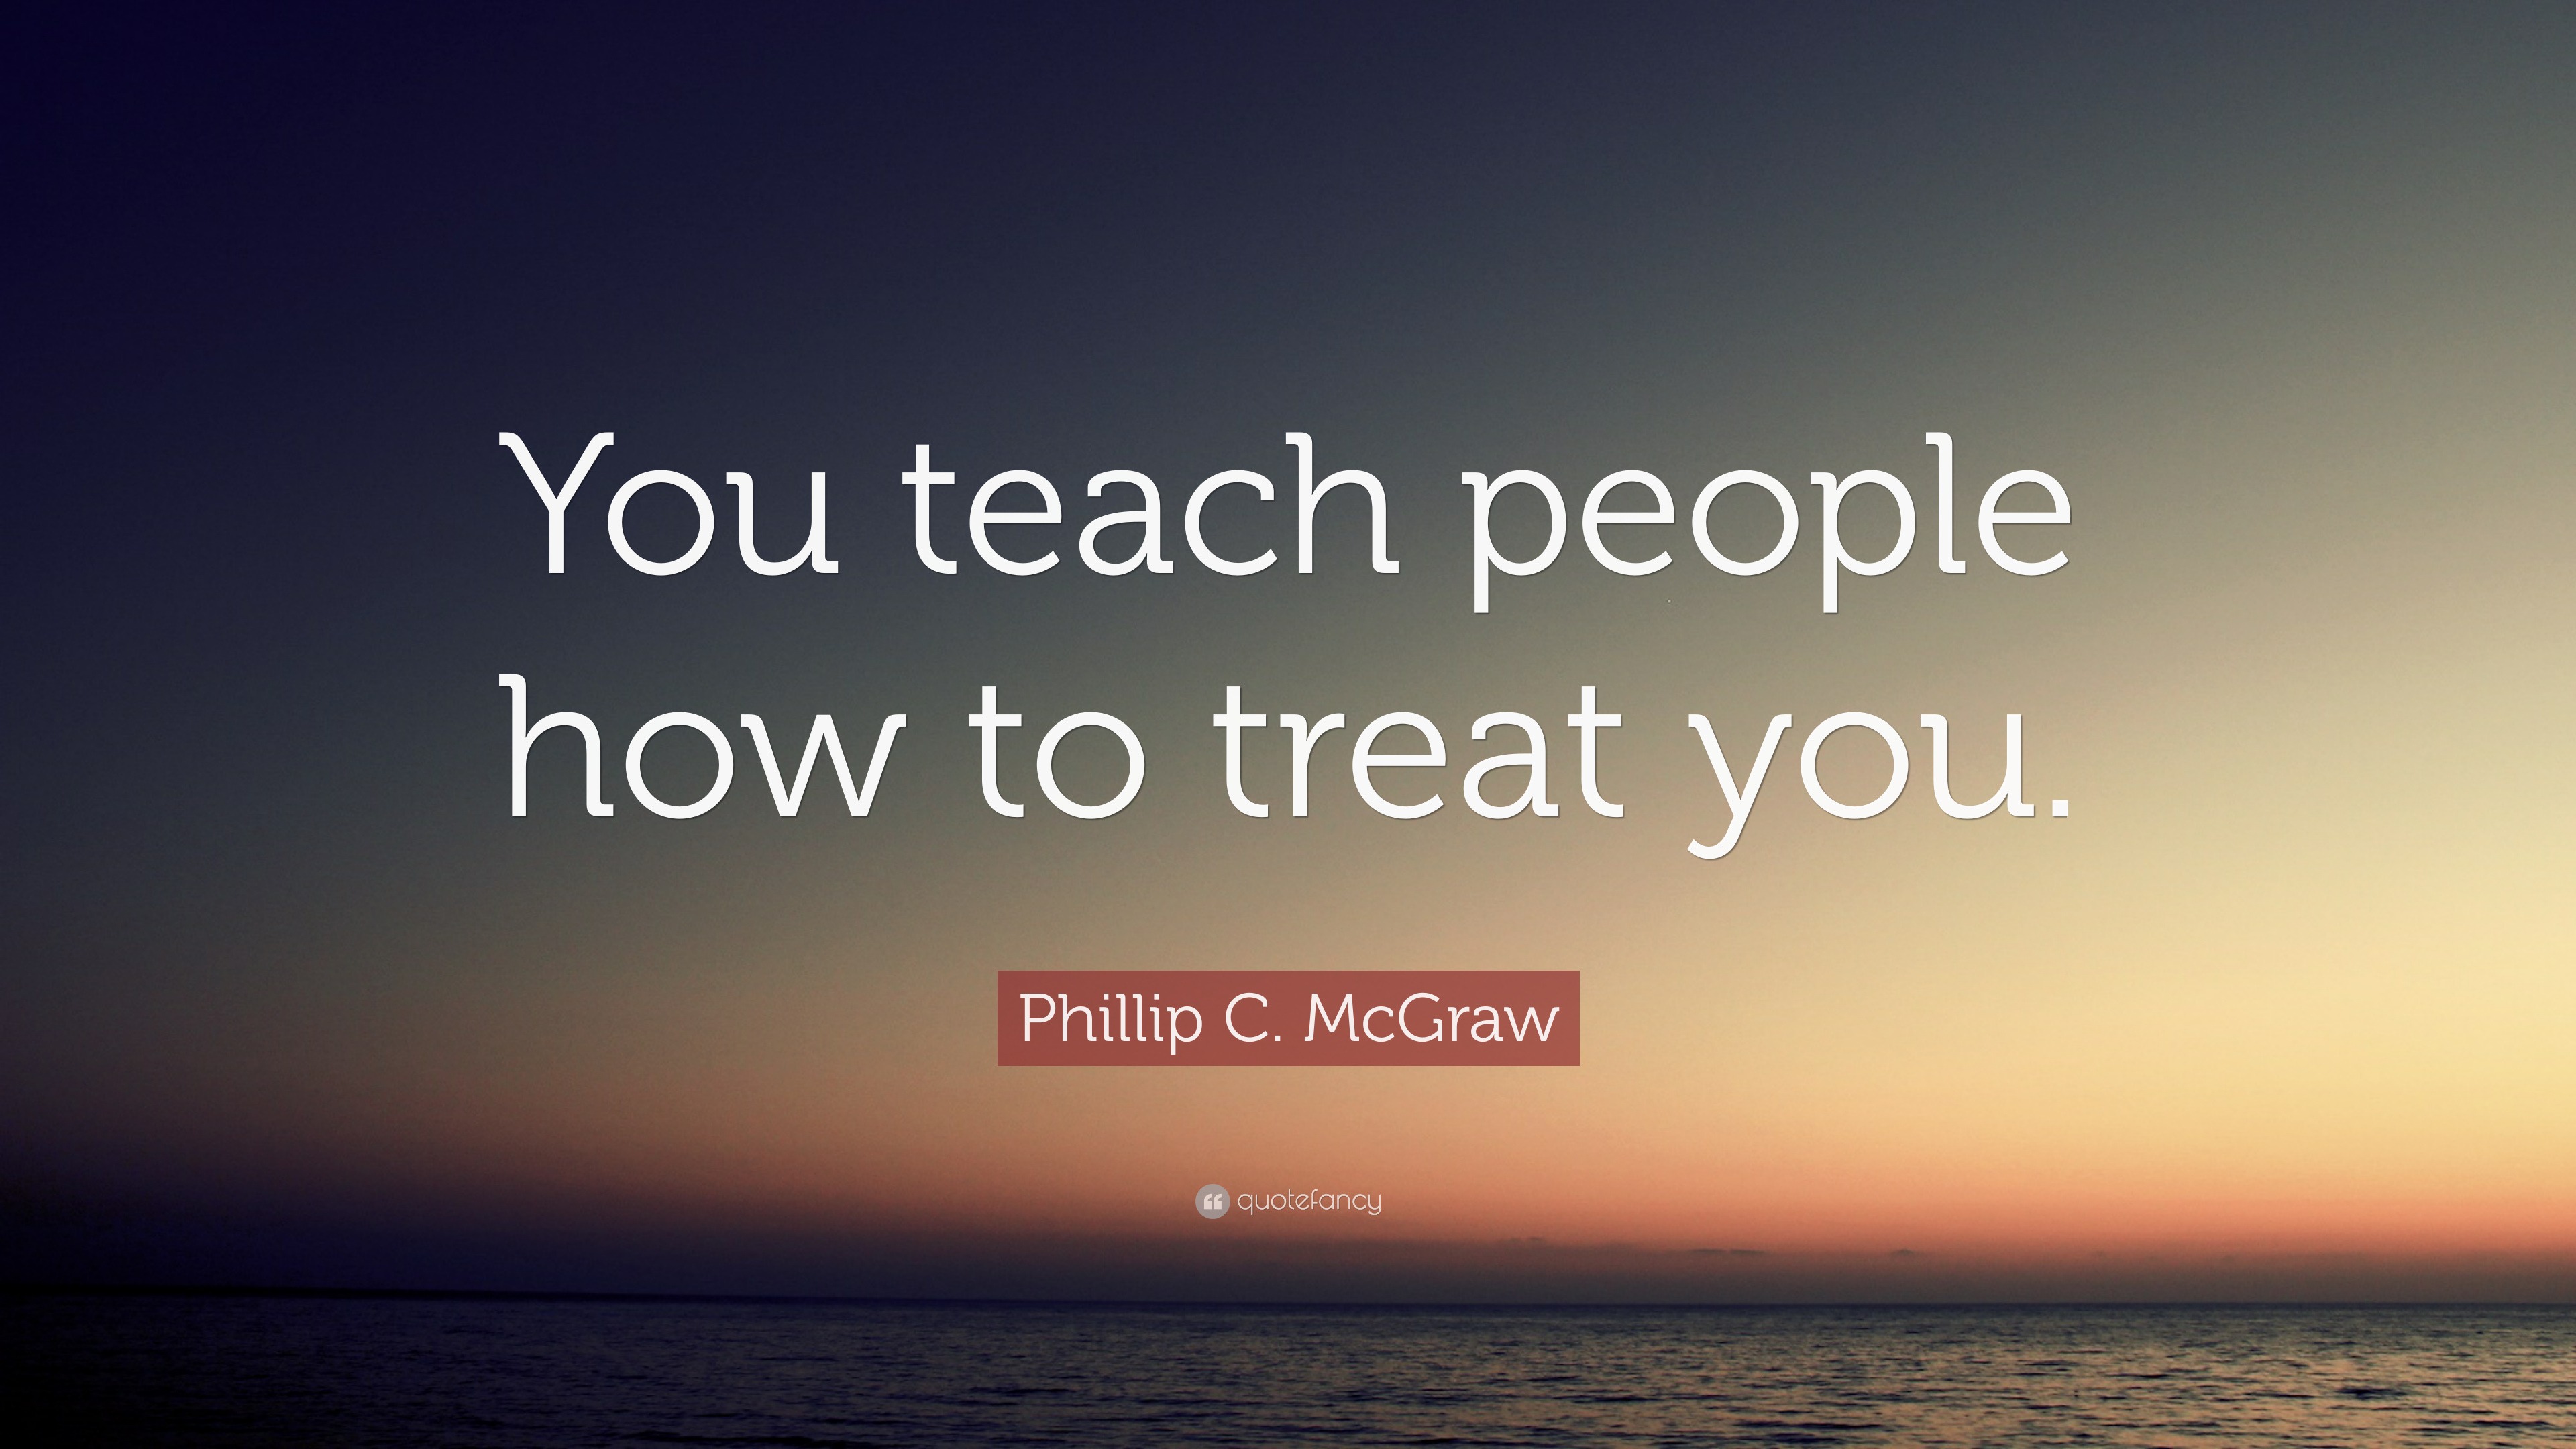 Oprah Winfrey Quote “you Teach People How To Treat You” 12 Wallpapers Quotefancy 6888